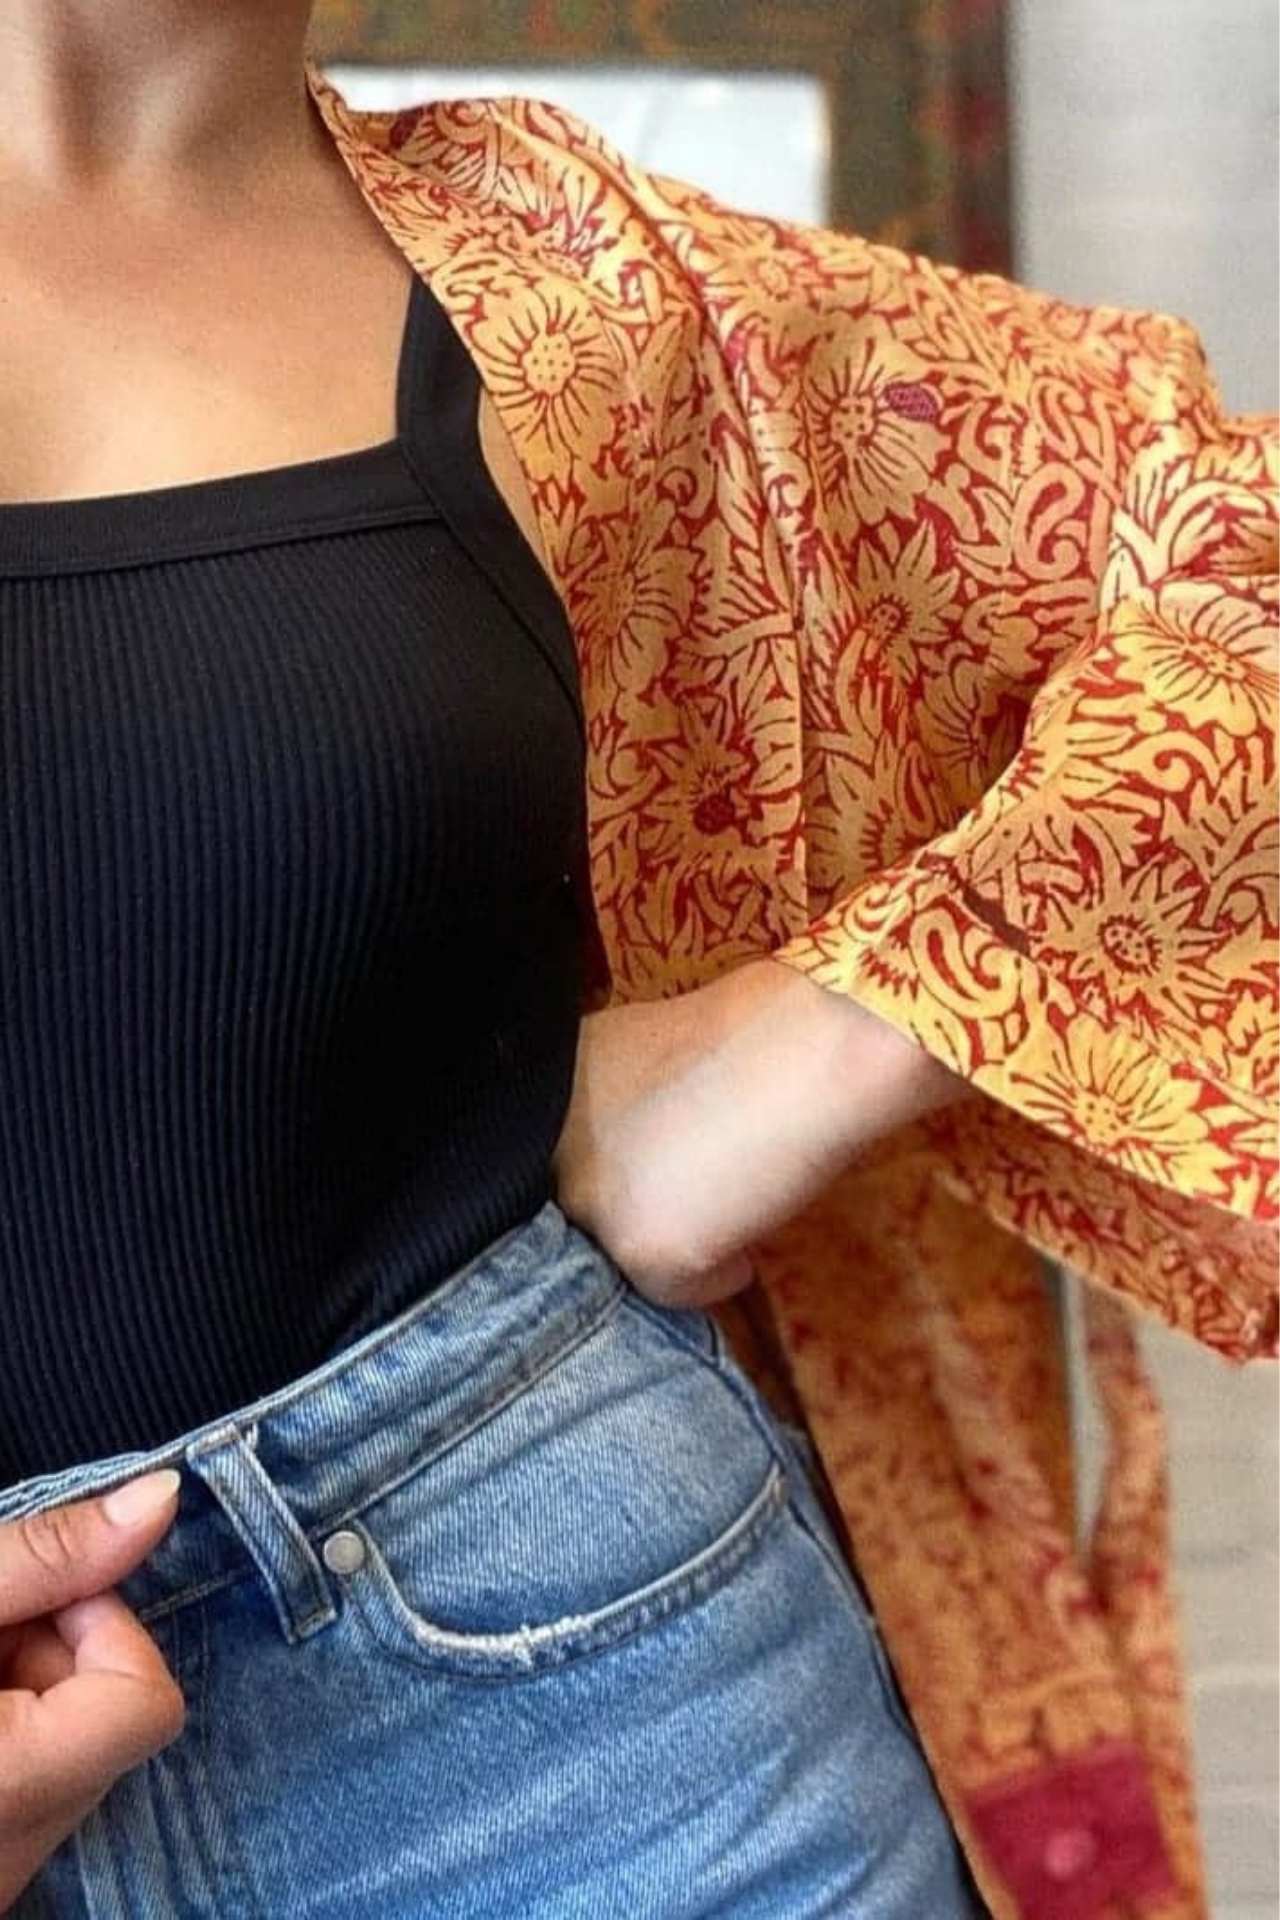 A close up on the kimonos shape showing wide sleeves and a relaxed boxy fit. The jacket has the same deep red colour, a bold floral pattern in a muted yellow tone.